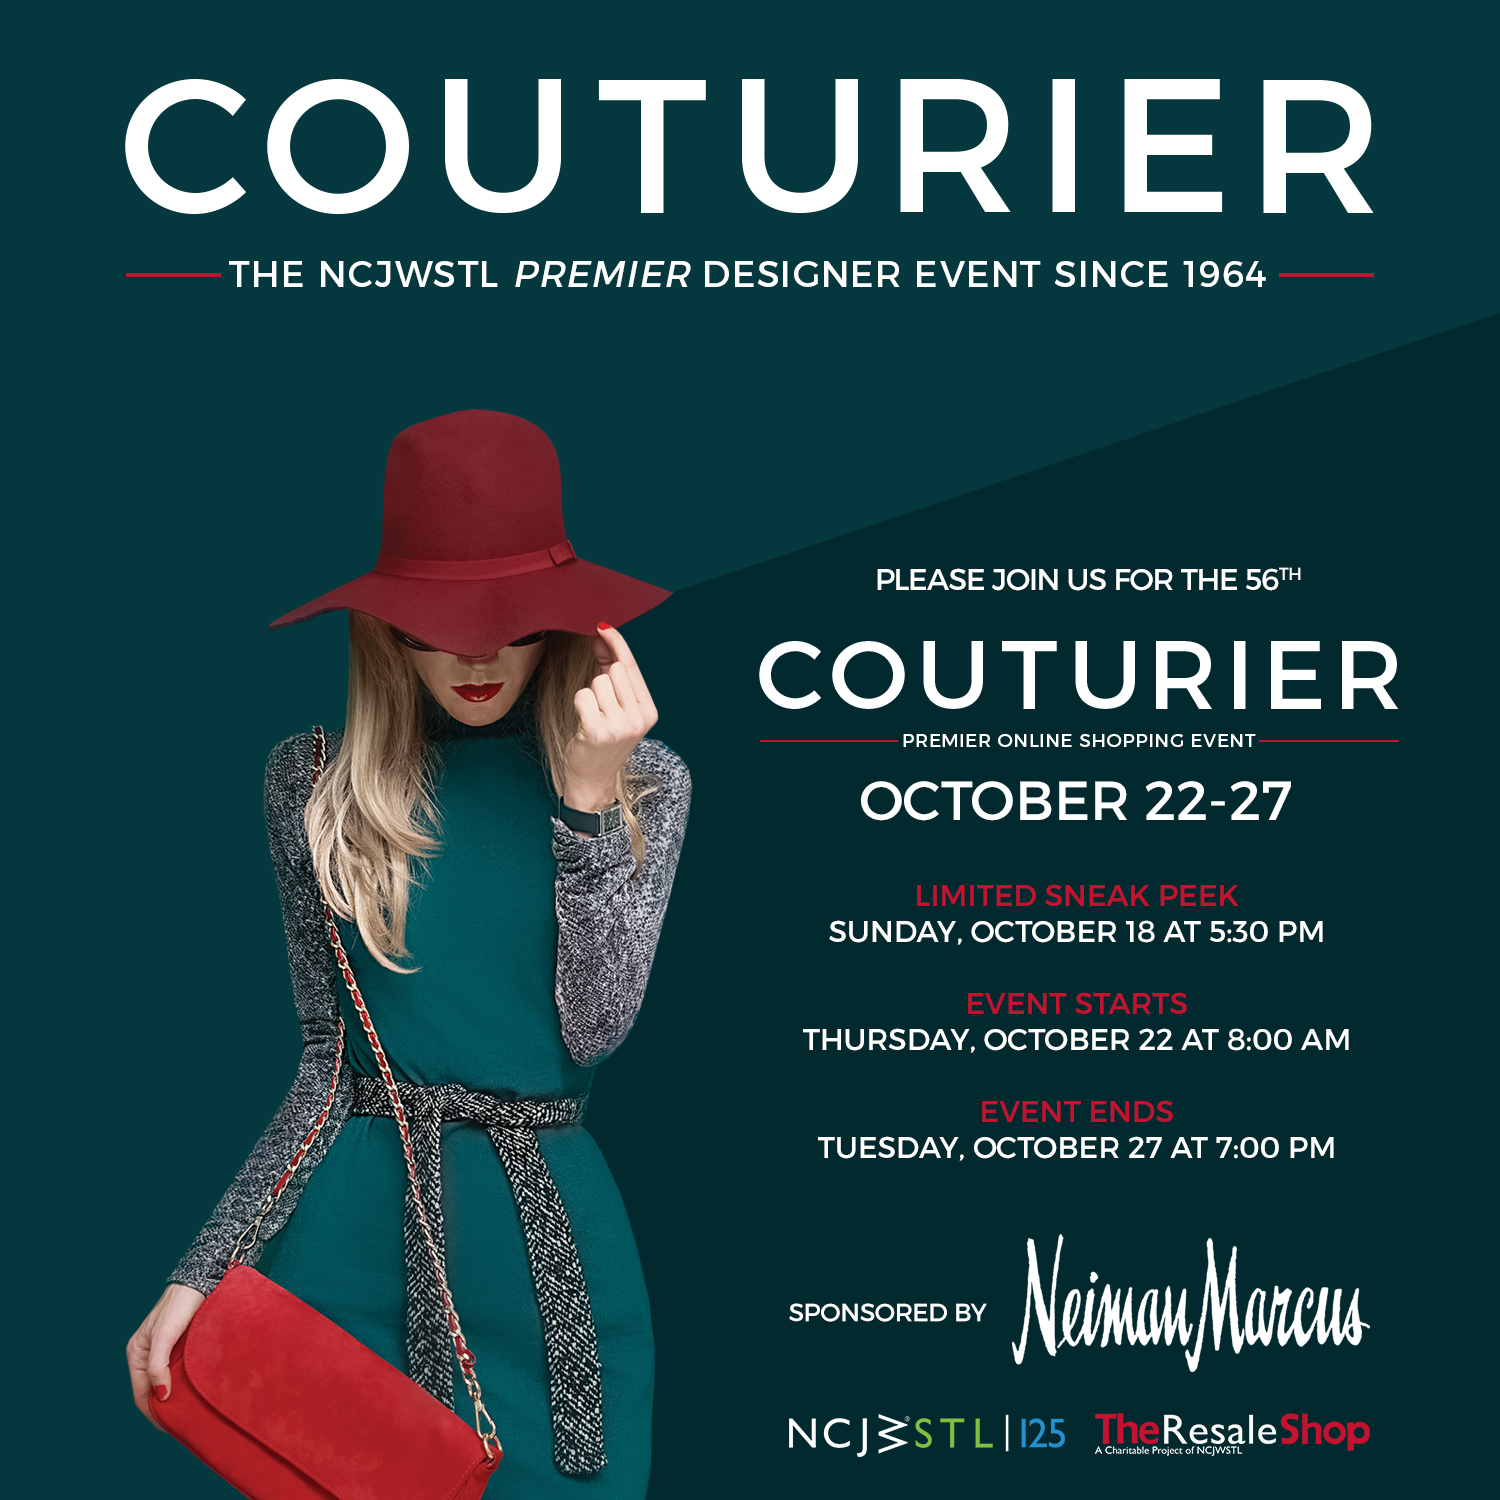 2020 Couturier graphic with white woman in red hat